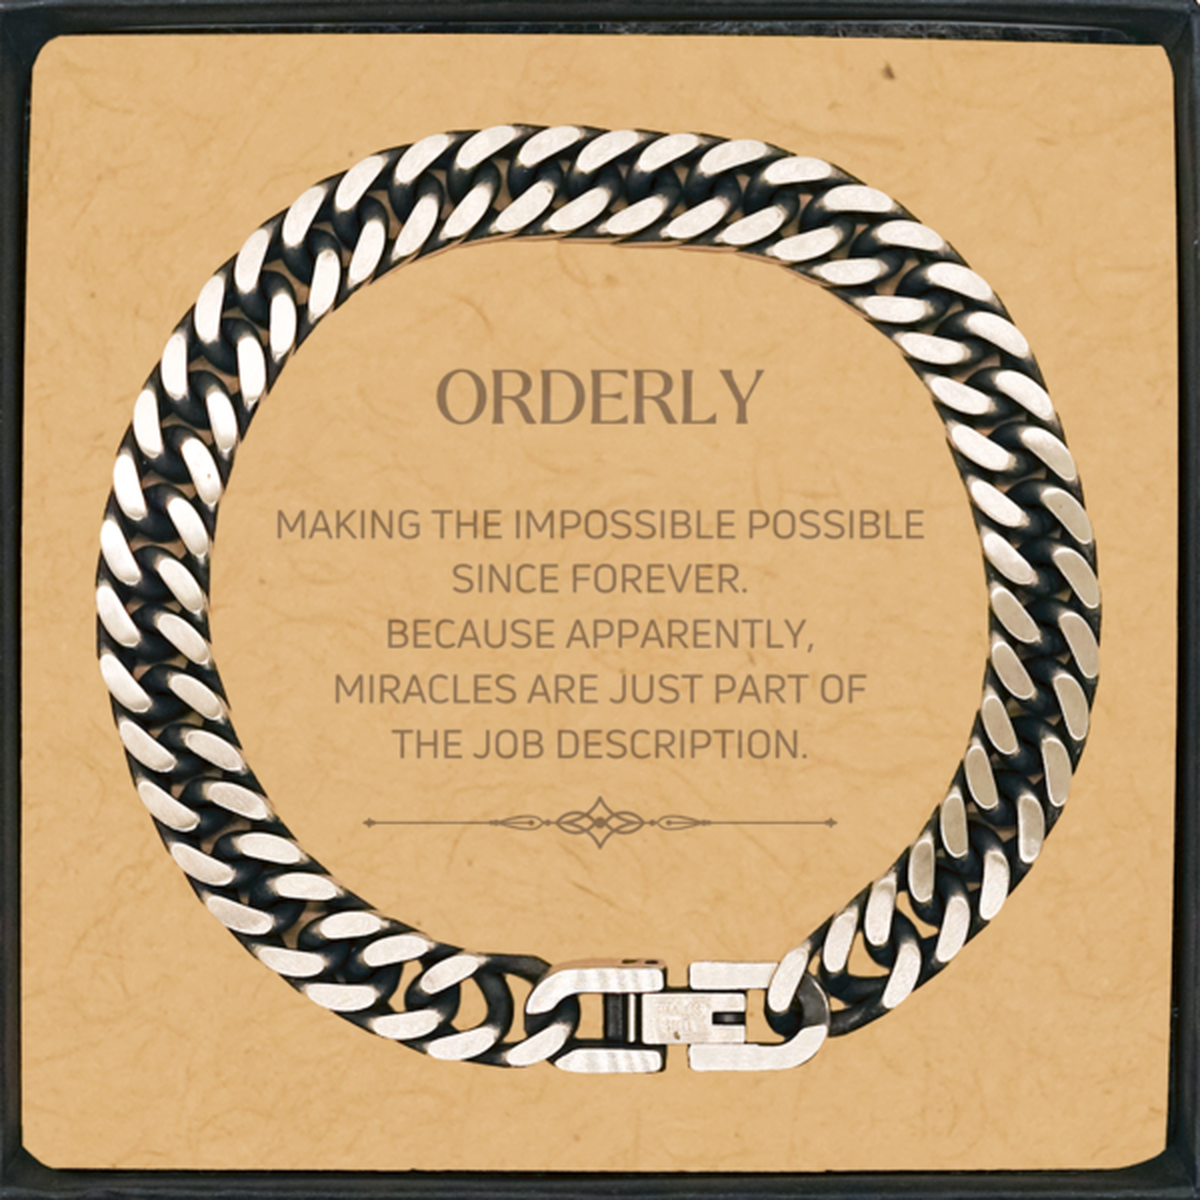 Funny Orderly Gifts, Miracles are just part of the job description, Inspirational Birthday Cuban Link Chain Bracelet For Orderly, Men, Women, Coworkers, Friends, Boss